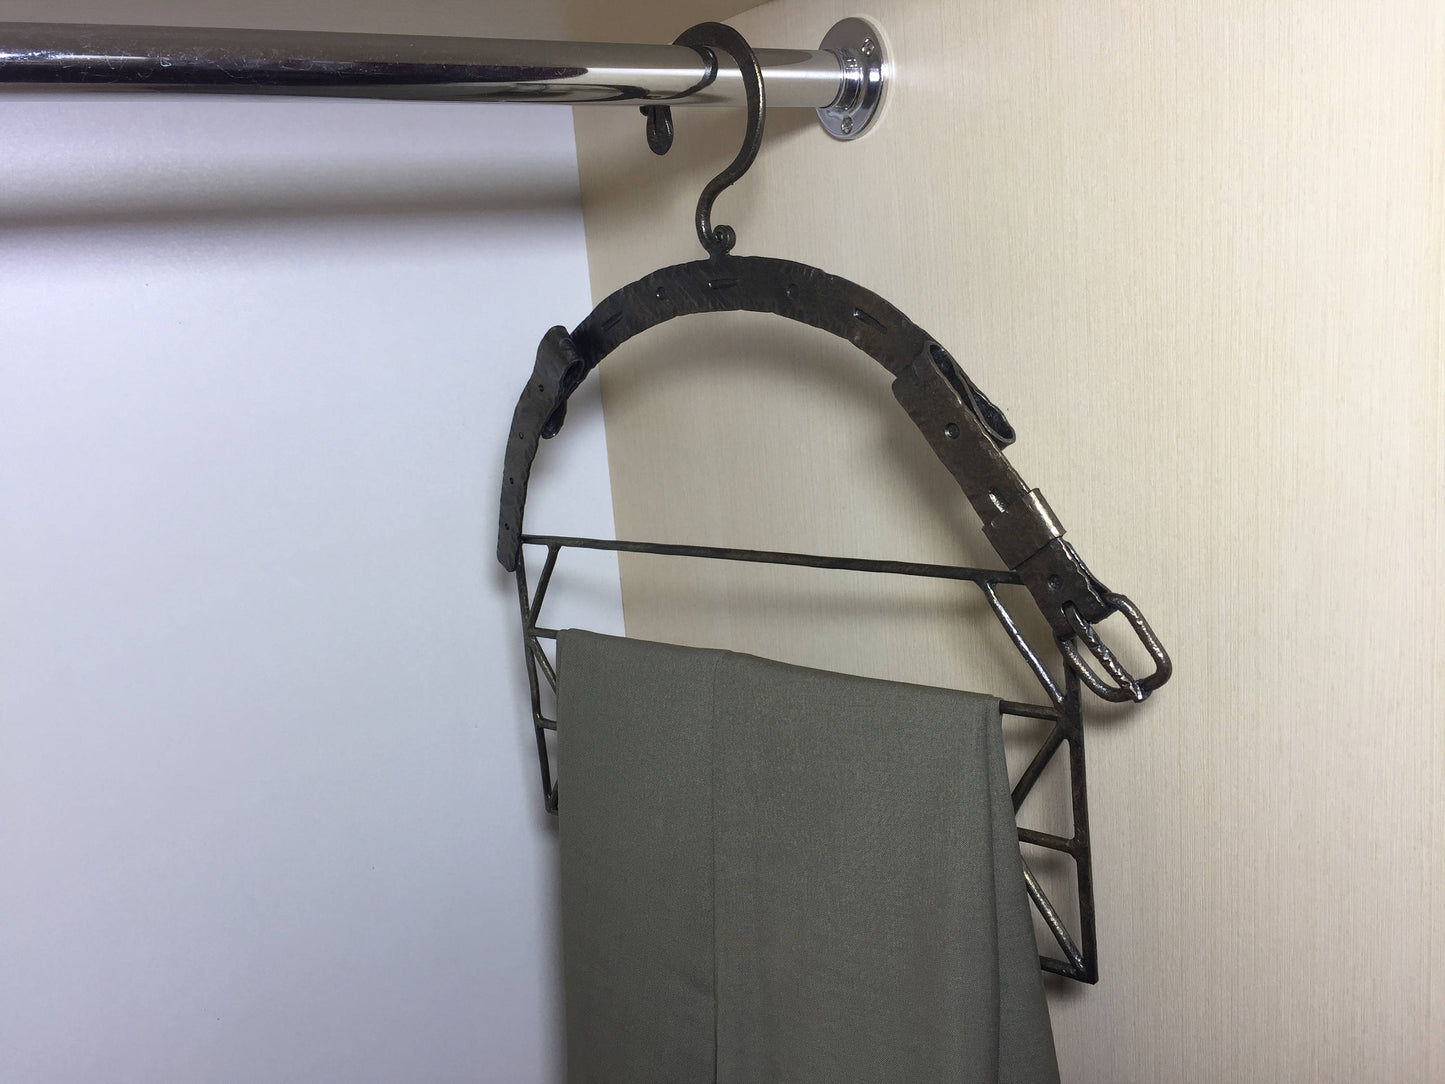 Hand forged tiered hanger for pants, clothes hangers, storage hangers, closet hangers, hangers set, coat hanger, dress hanger, father's day